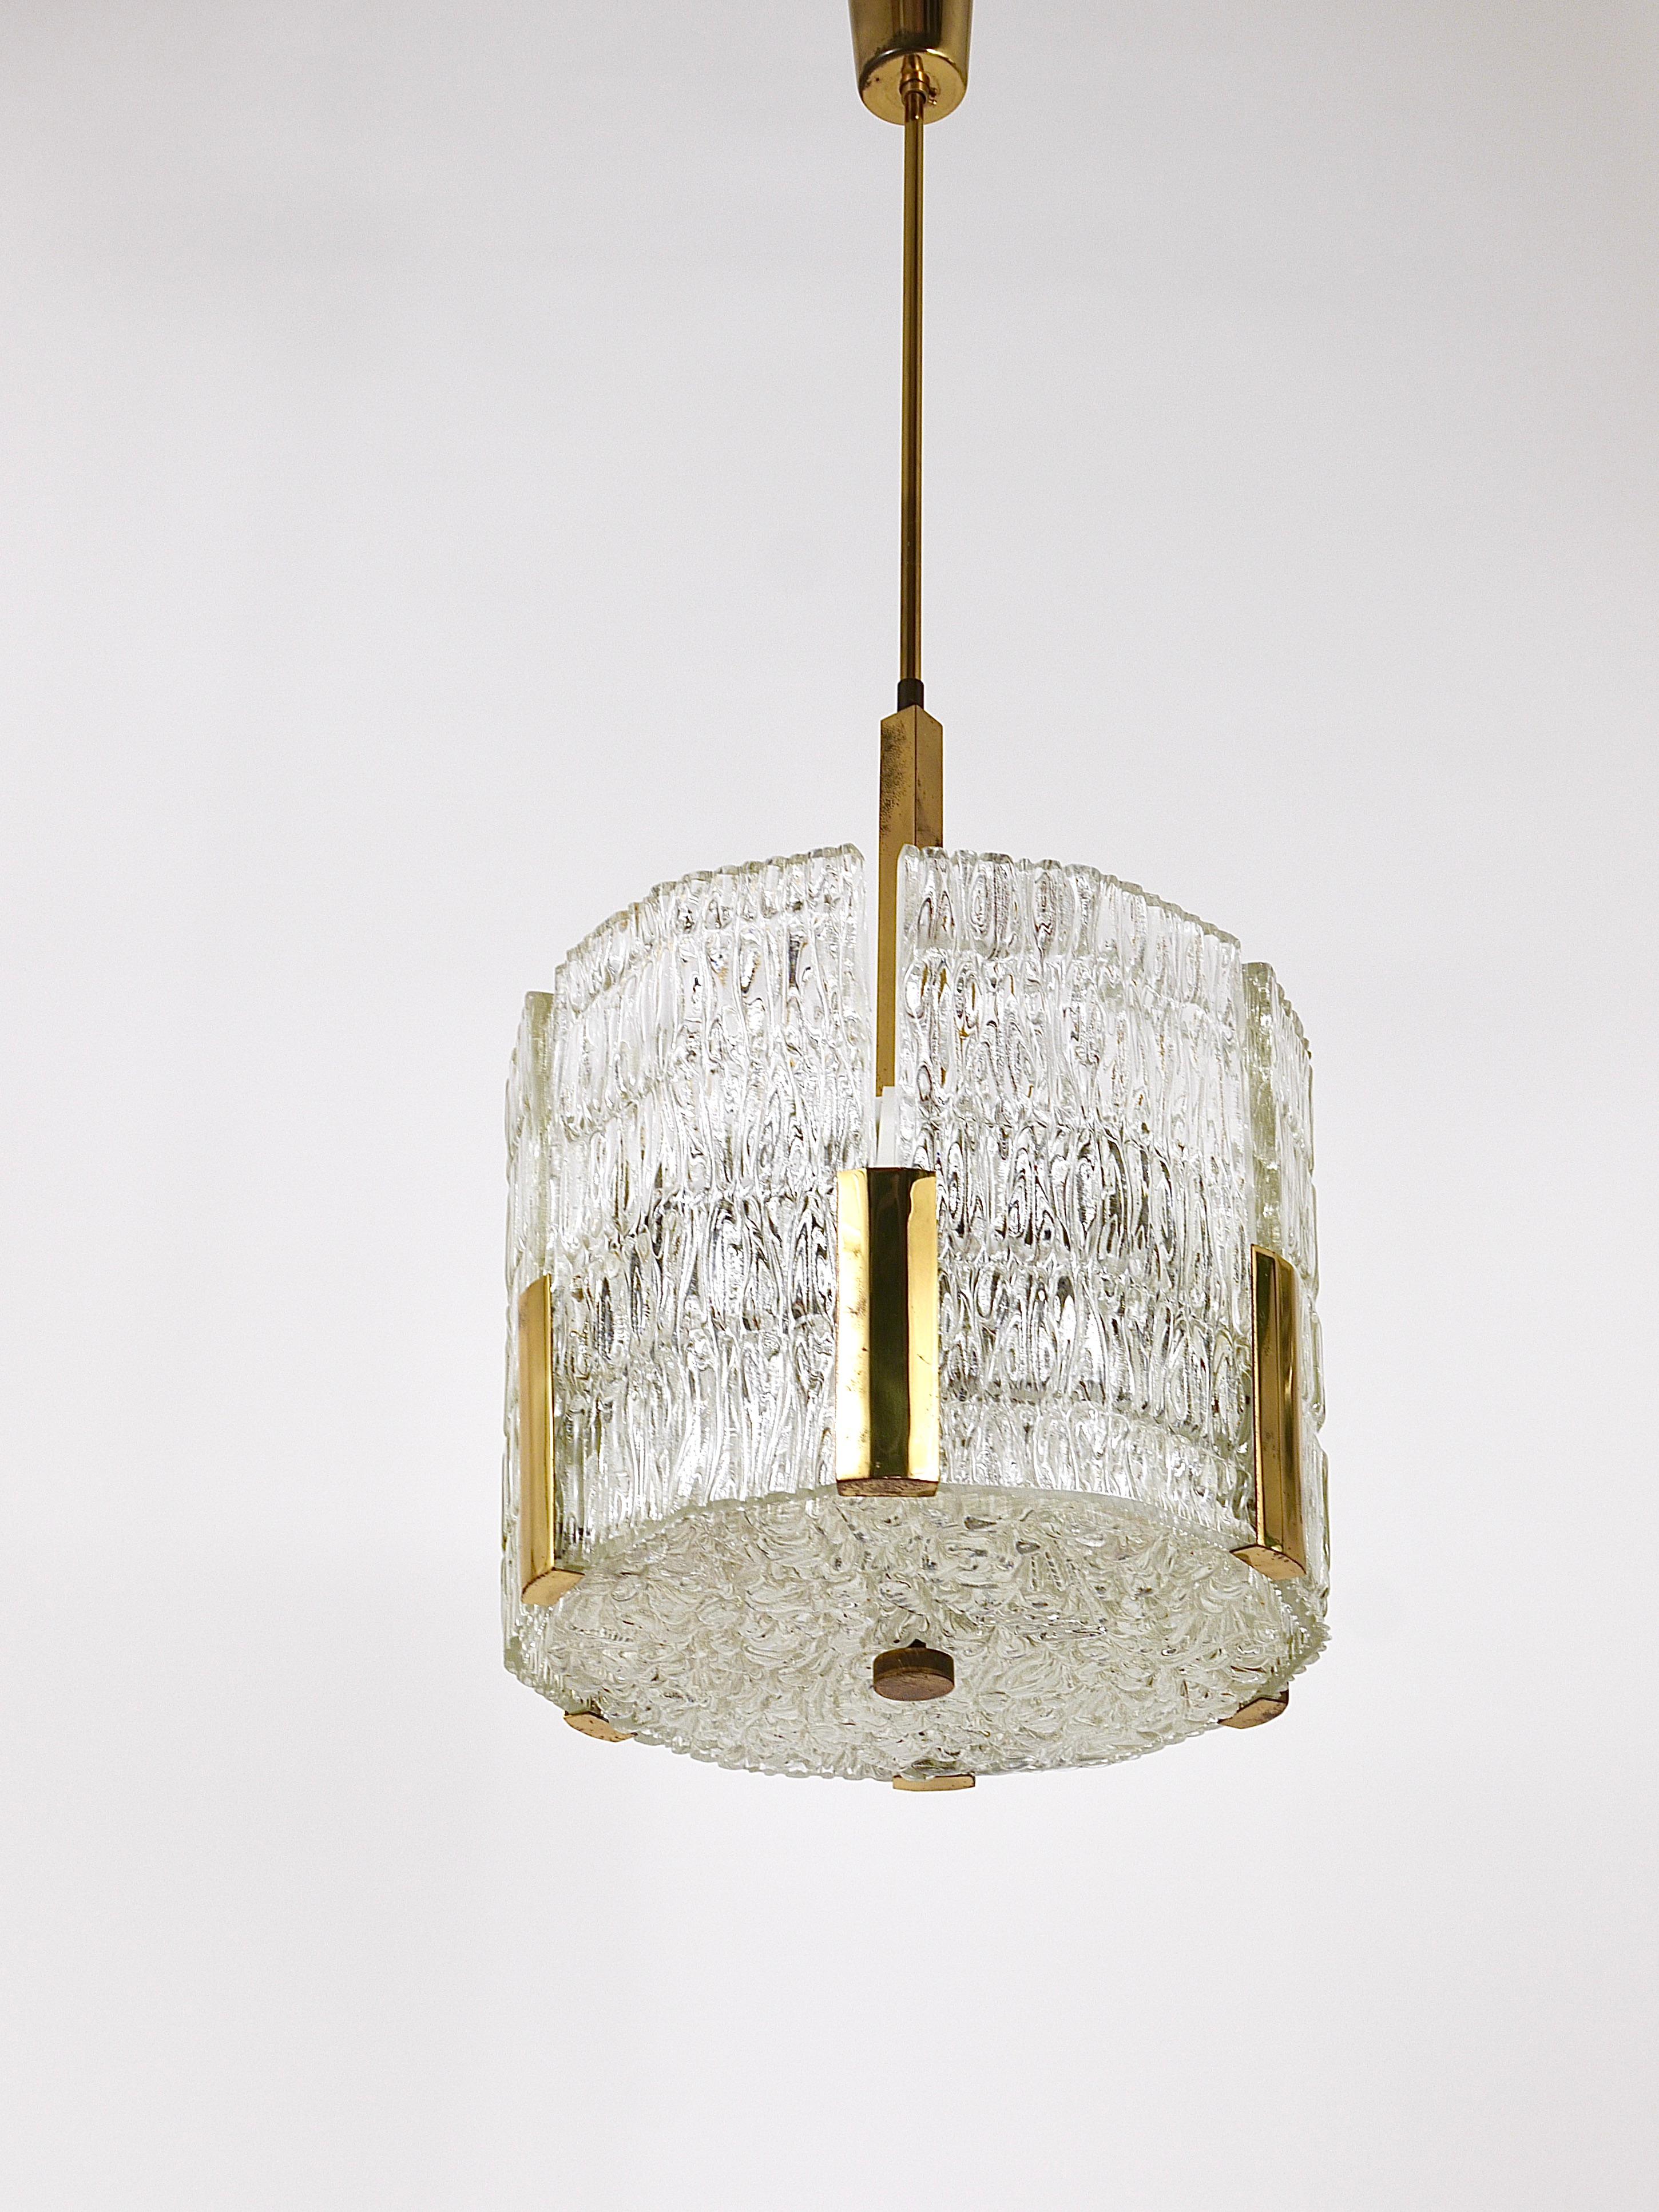 A beautiful midcentury brass drum chandelier from the 1960s, executed by J.T. Kalmar, Vienna/Austria. Consists of a metal frame with six solid textured melting glass panels, a dodecagonal glass plate on its bottom. On a brass rod with nice brass